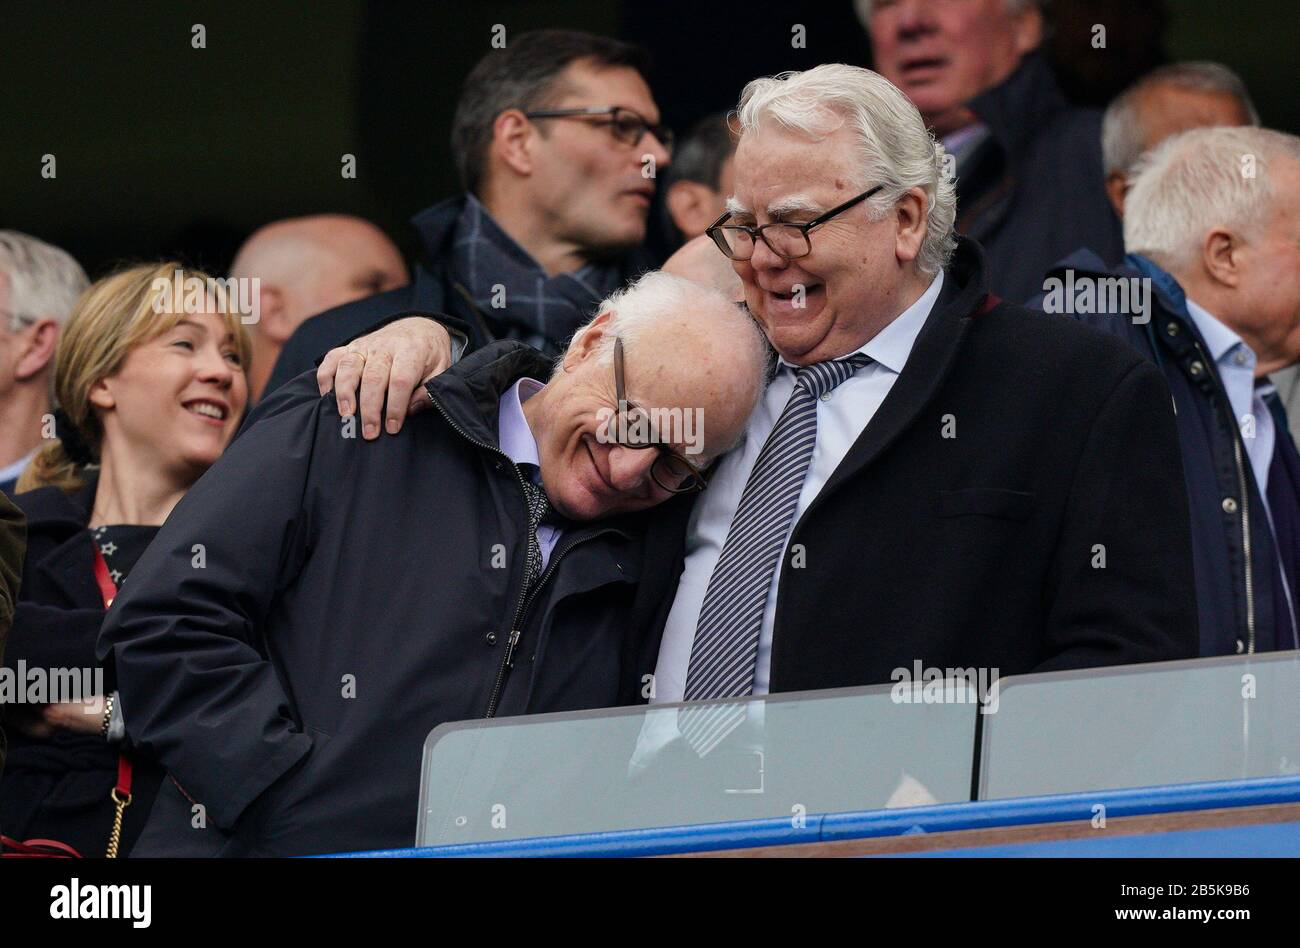 London, UK. 08th Mar, 2020. Everton Chairman William 'Bill' Kenwright, CBE embraces Chelsea Chairman Bruce Buck during the Premier League match between Chelsea and Everton at Stamford Bridge, London, England on 8 March 2020. Photo by Andy Rowland. Credit: PRiME Media Images/Alamy Live News Stock Photo